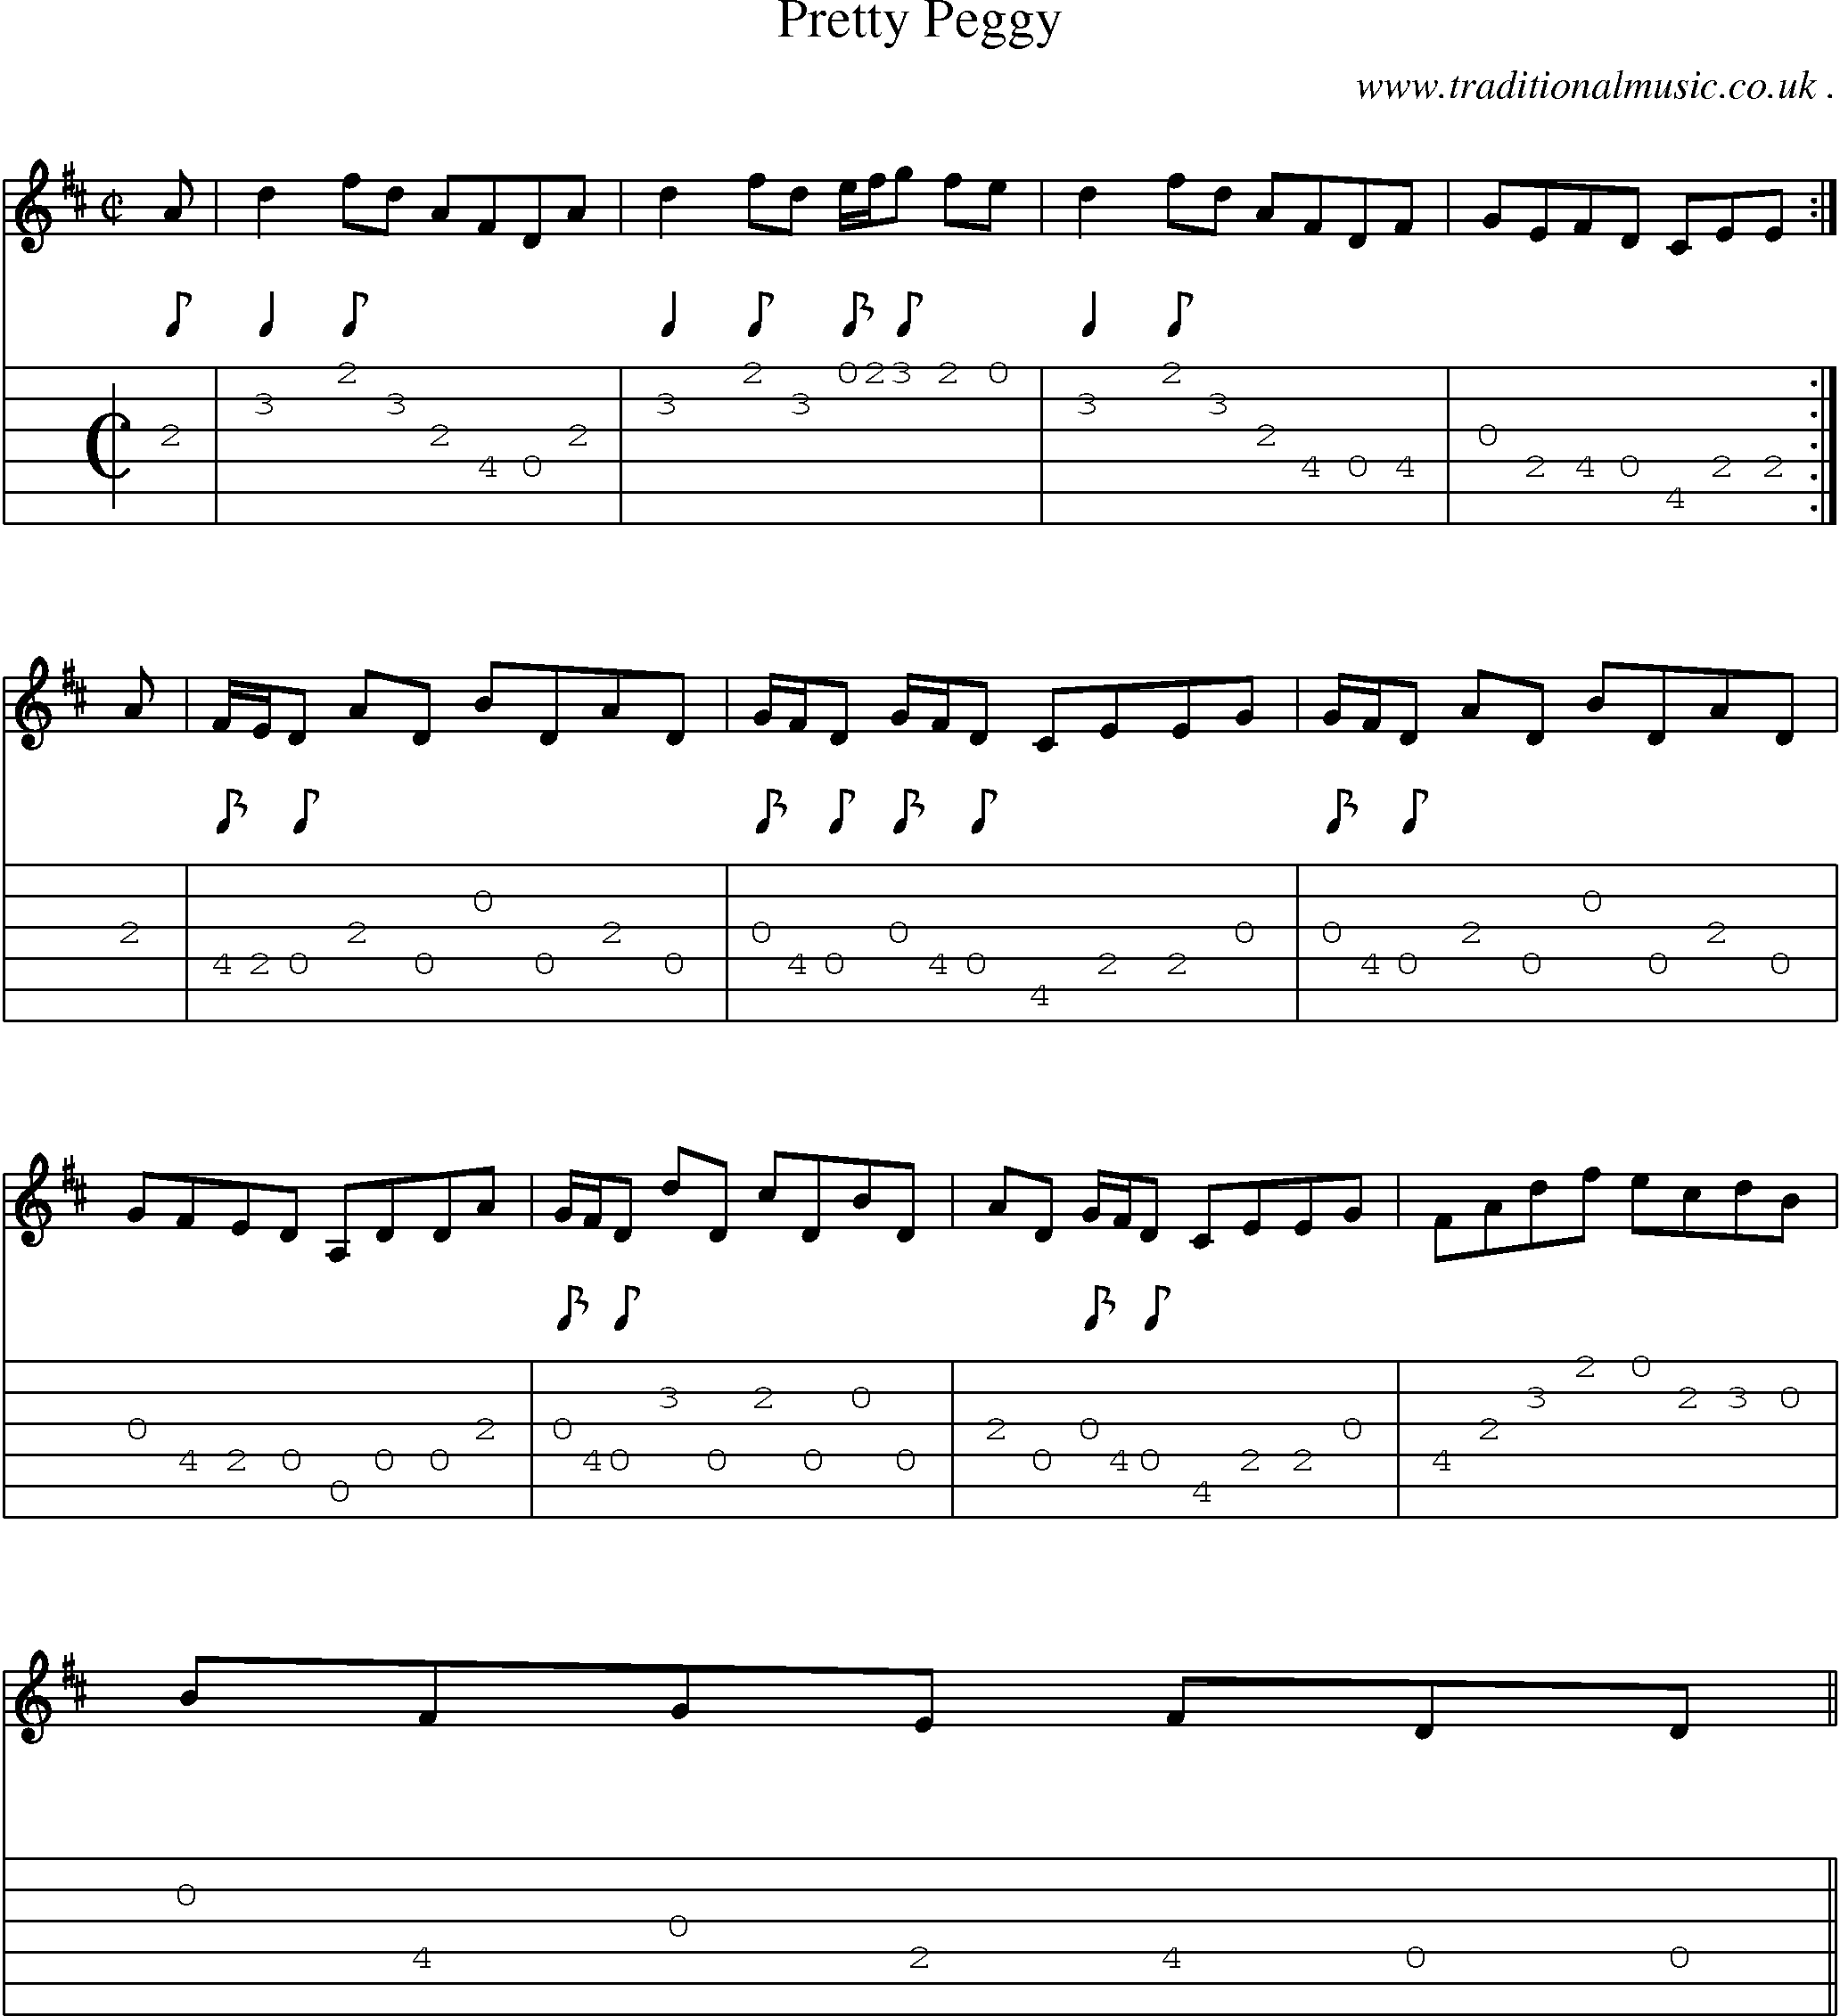 Sheet-music  score, Chords and Guitar Tabs for Pretty Peggy 